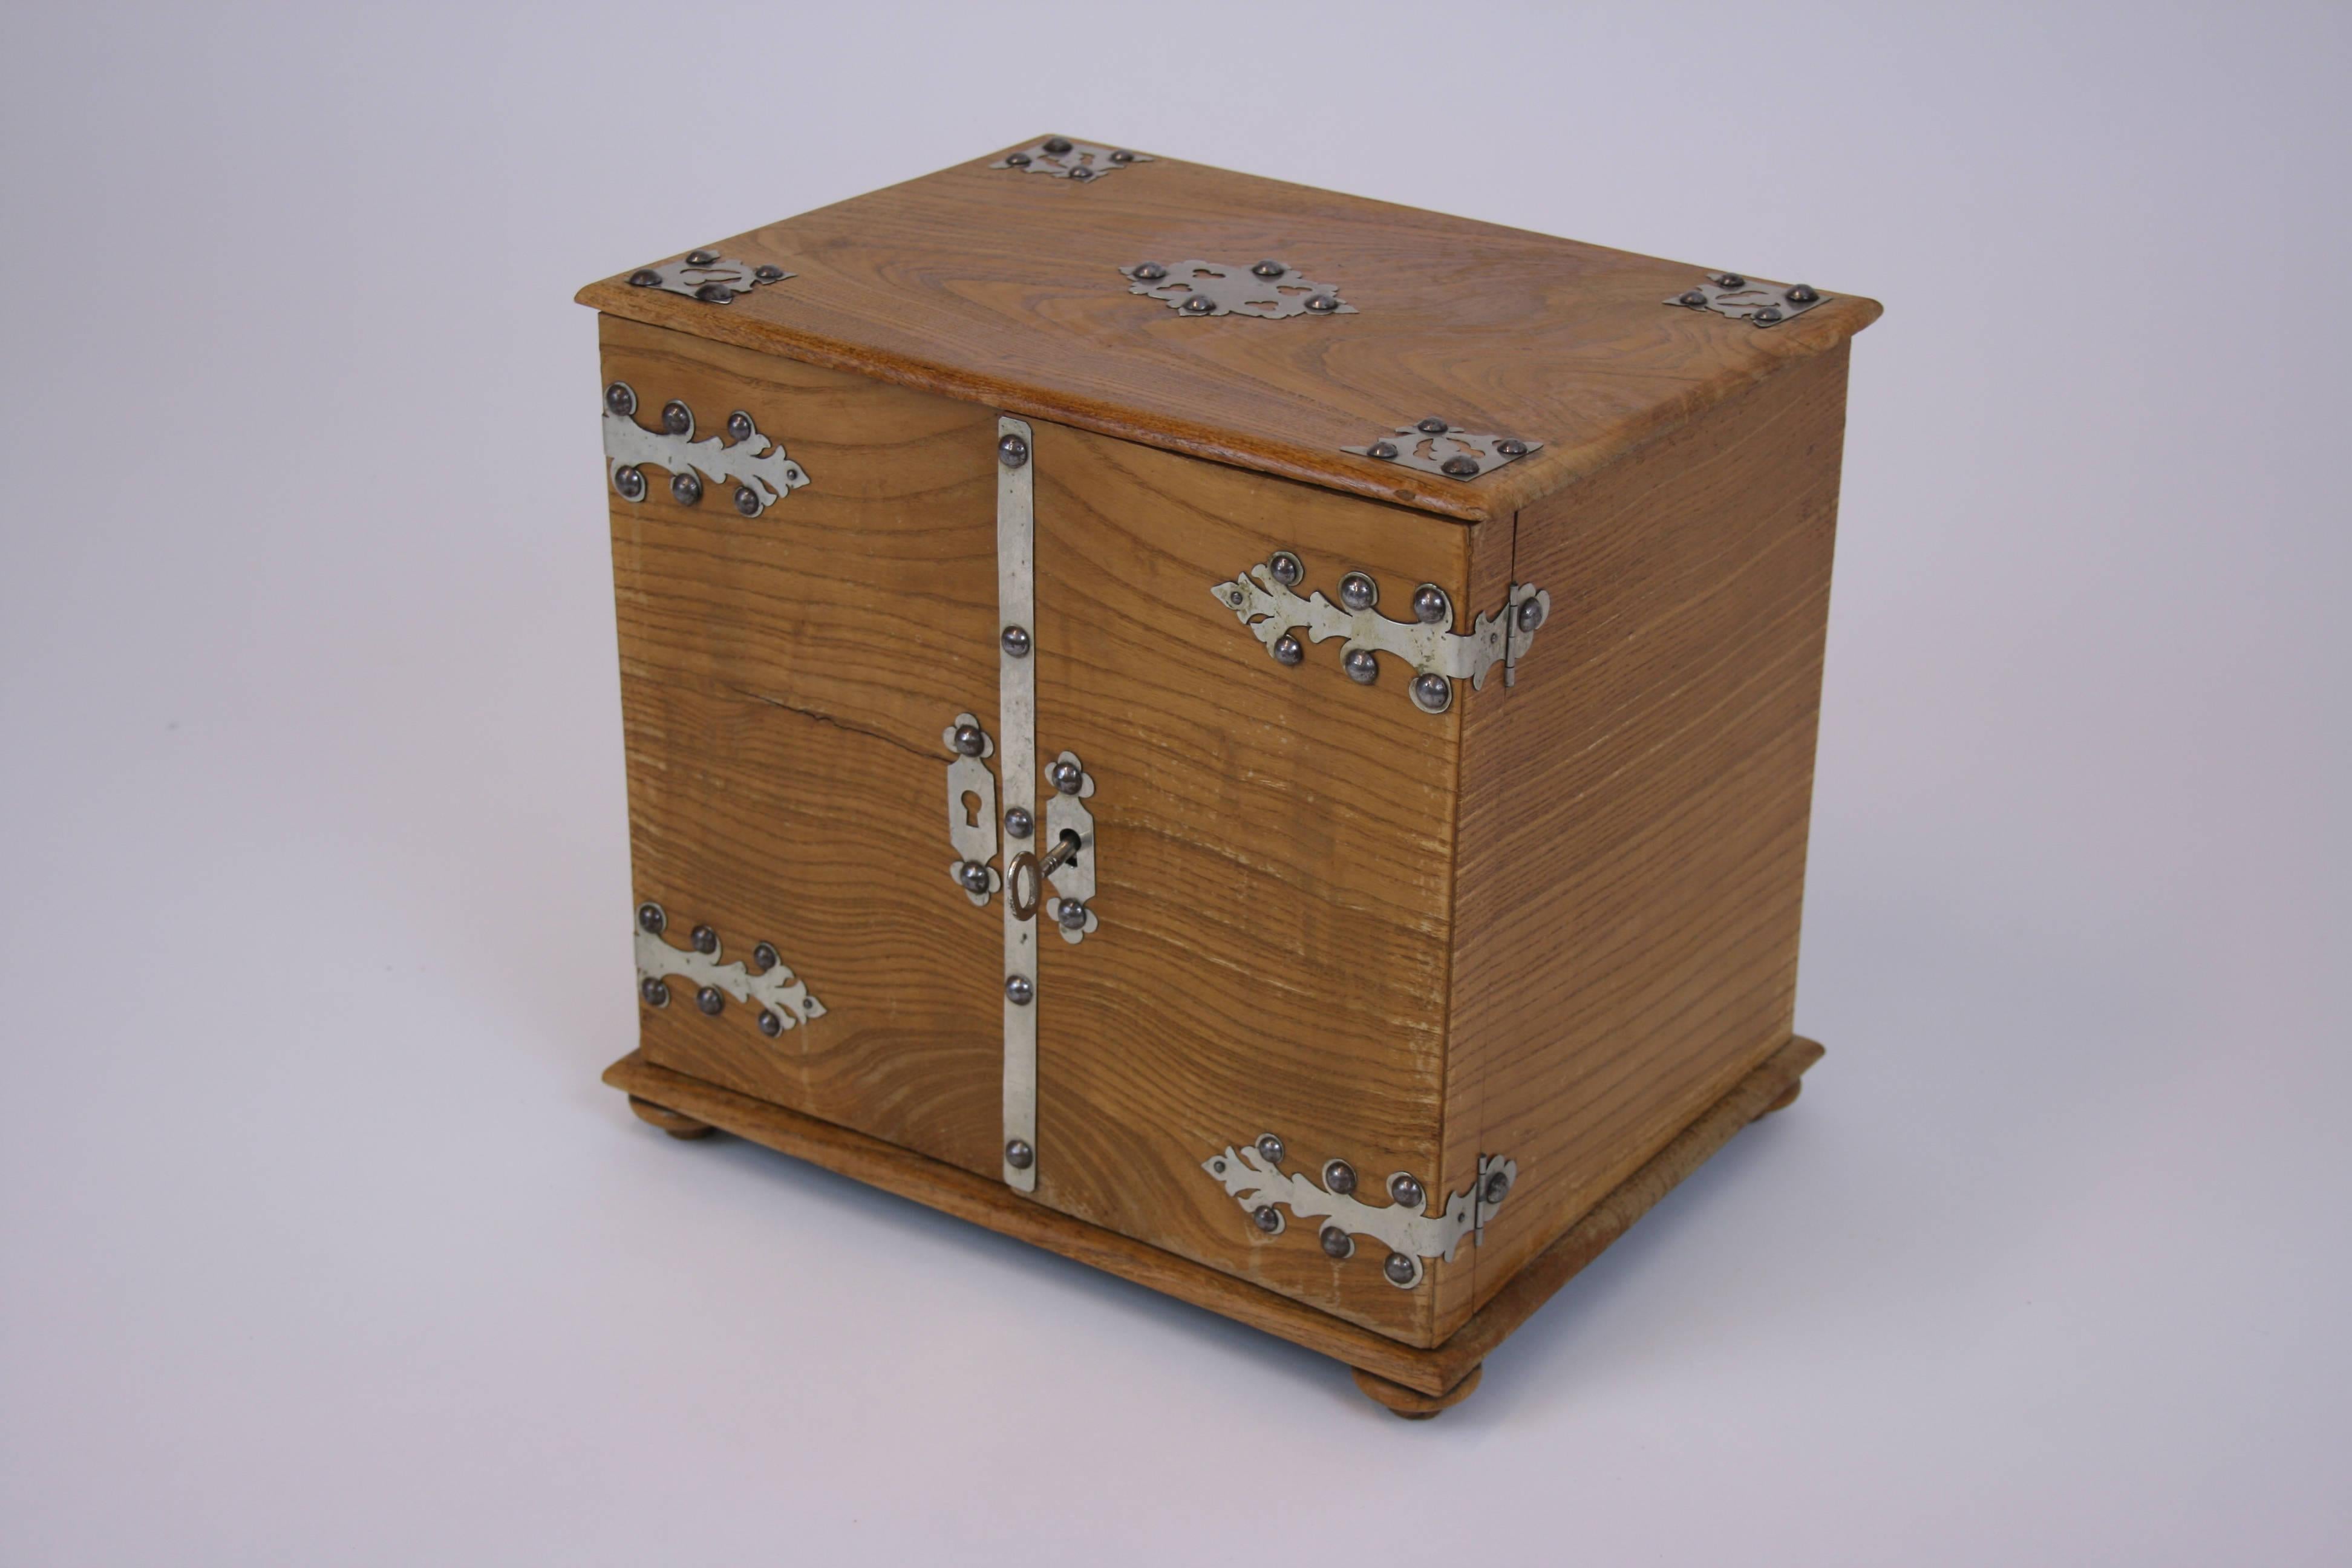 An attractive small oakwood casket most probably manufactured in the late 19th century. This object, richly decorated with external metal fittings has three drawers inside and quotes the style canon of the Italian Renaissance. It is slightly